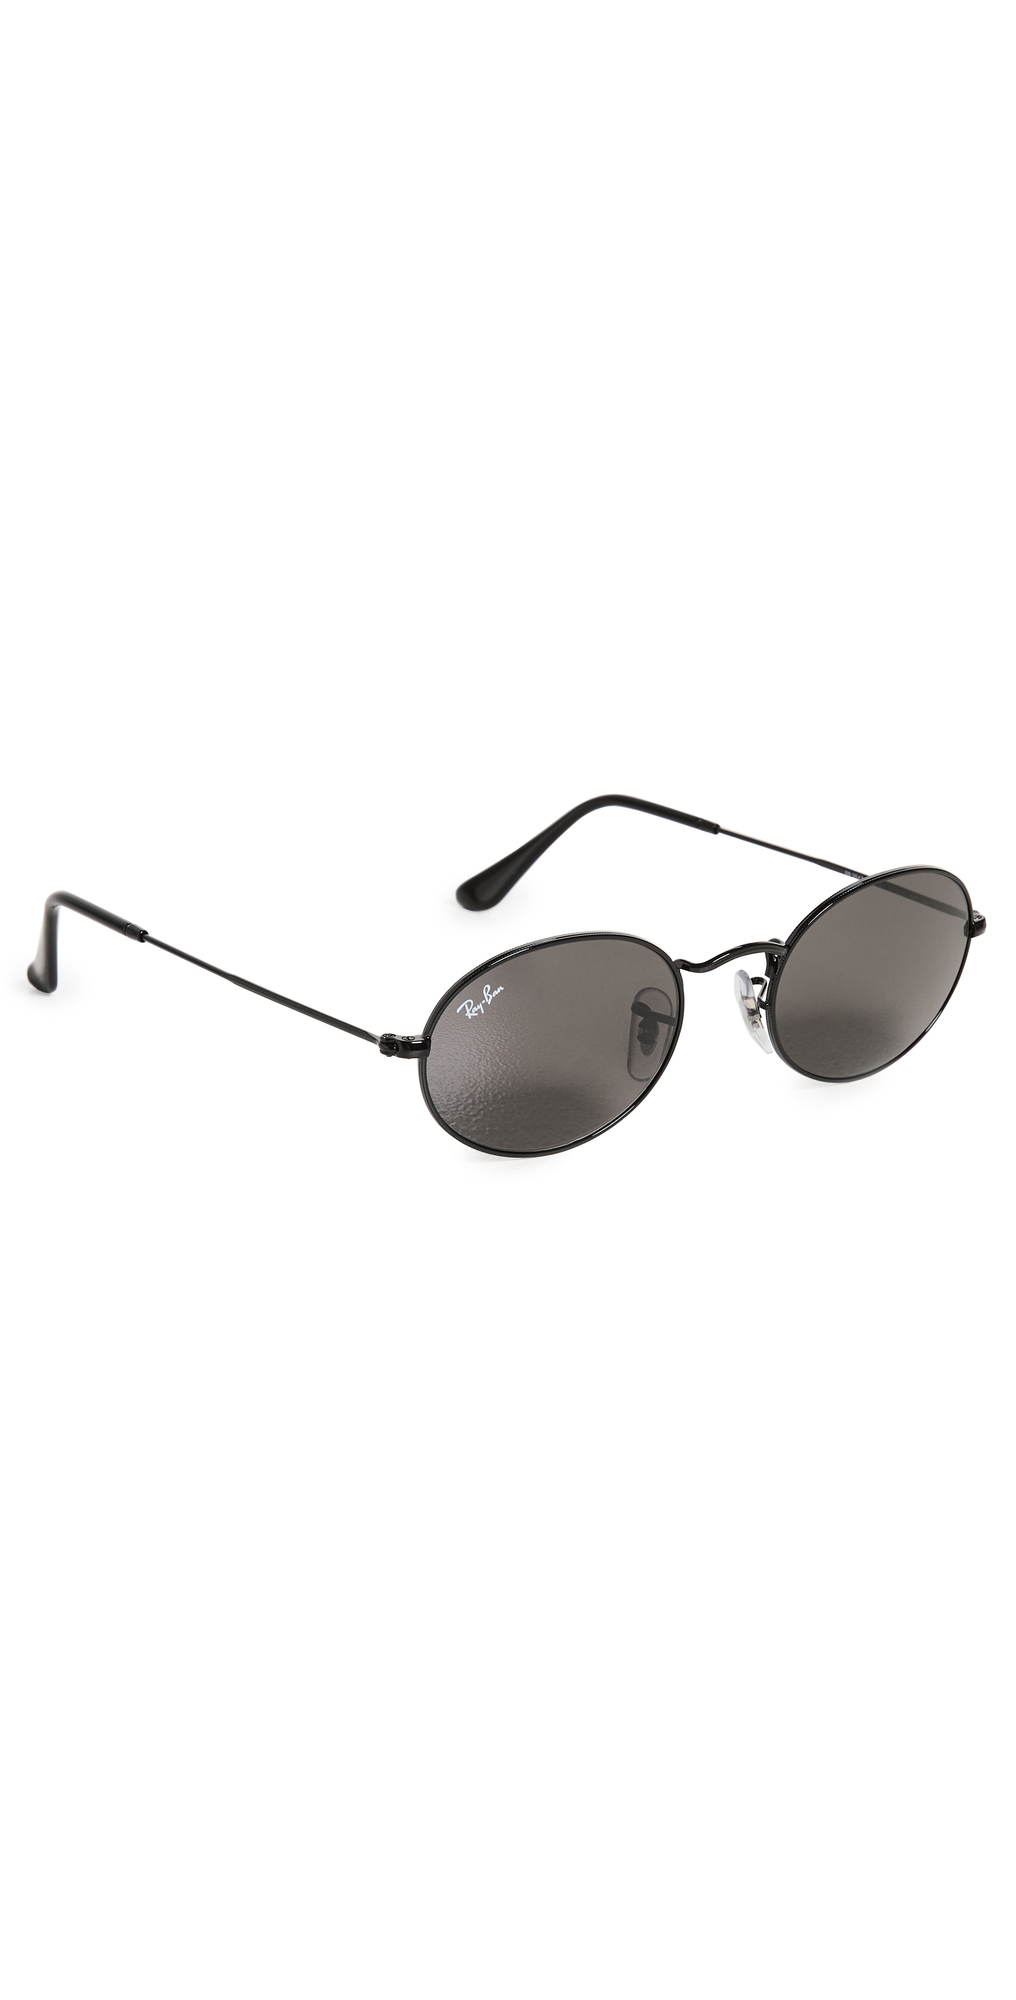 Ray-Ban 0RB3547 Evolution Oval Sunglasses in black / grey